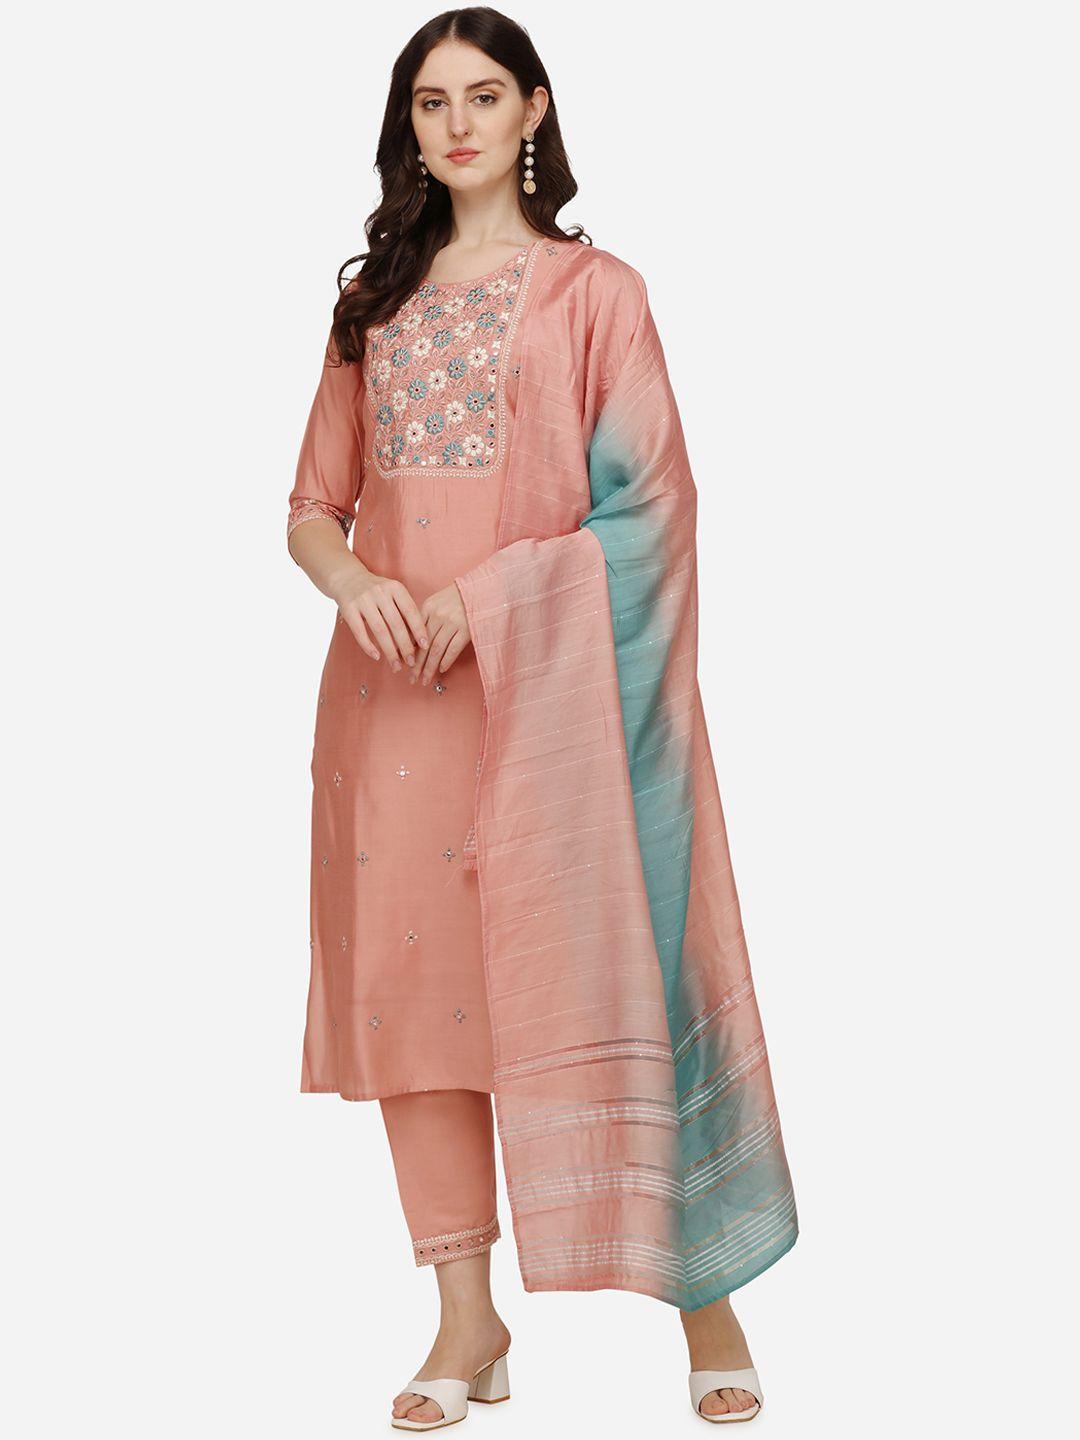 berrylicious-women-pink-floral-embroidered-thread-work-chanderi-cotton-kurta-with-trousers-&-with-dupatta